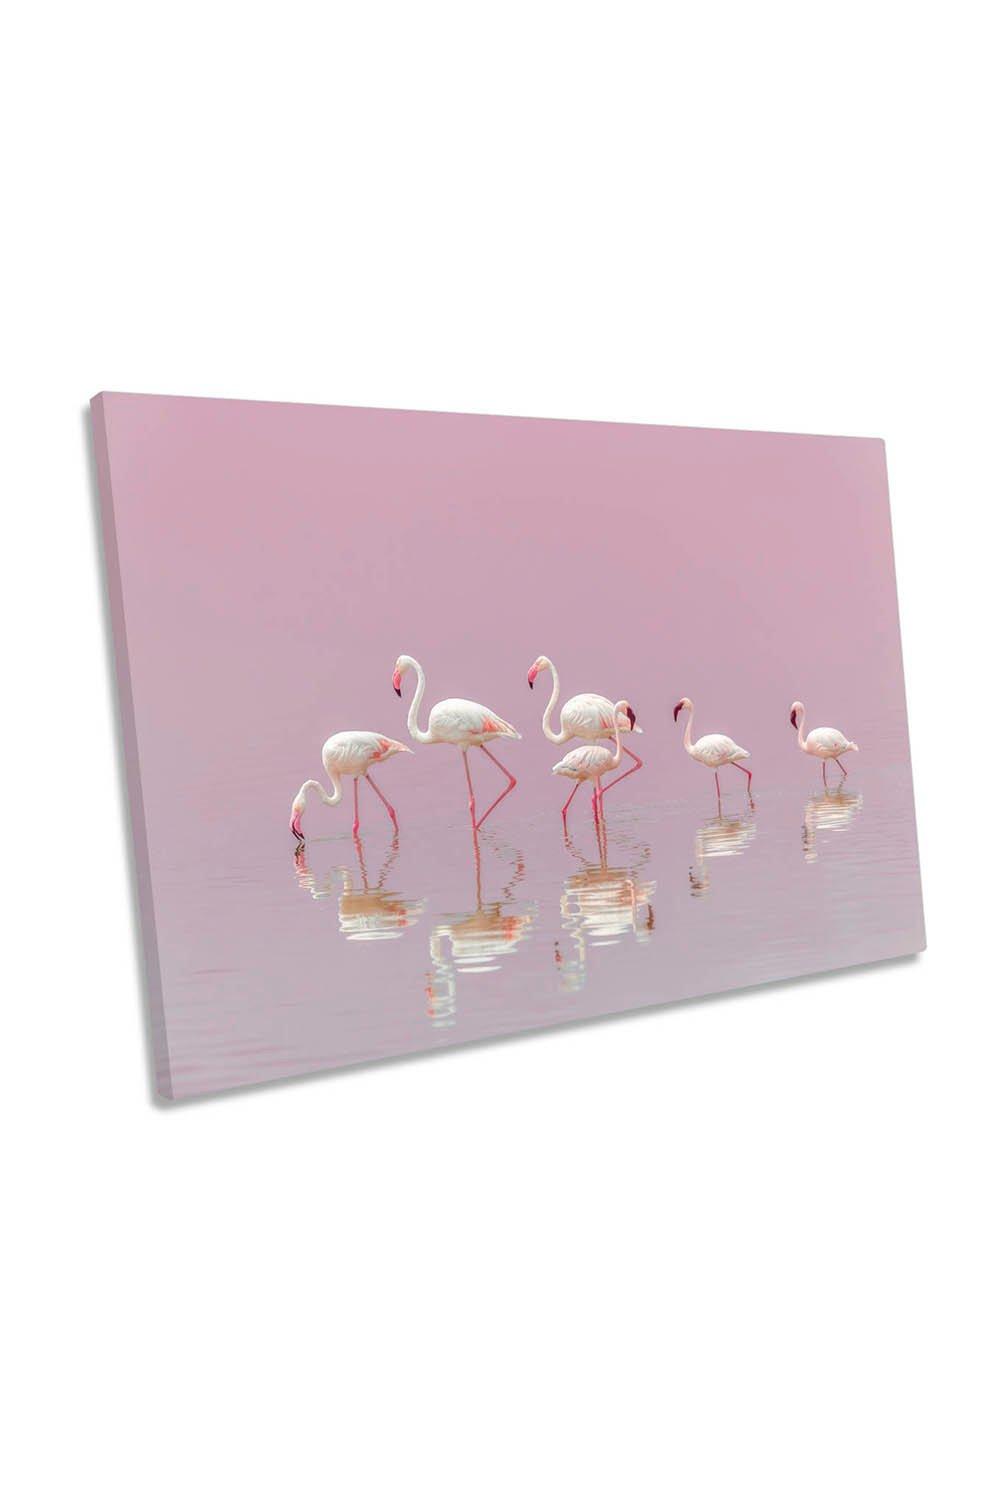 Pink Flamingos Water Reflection Canvas Wall Art Picture Print